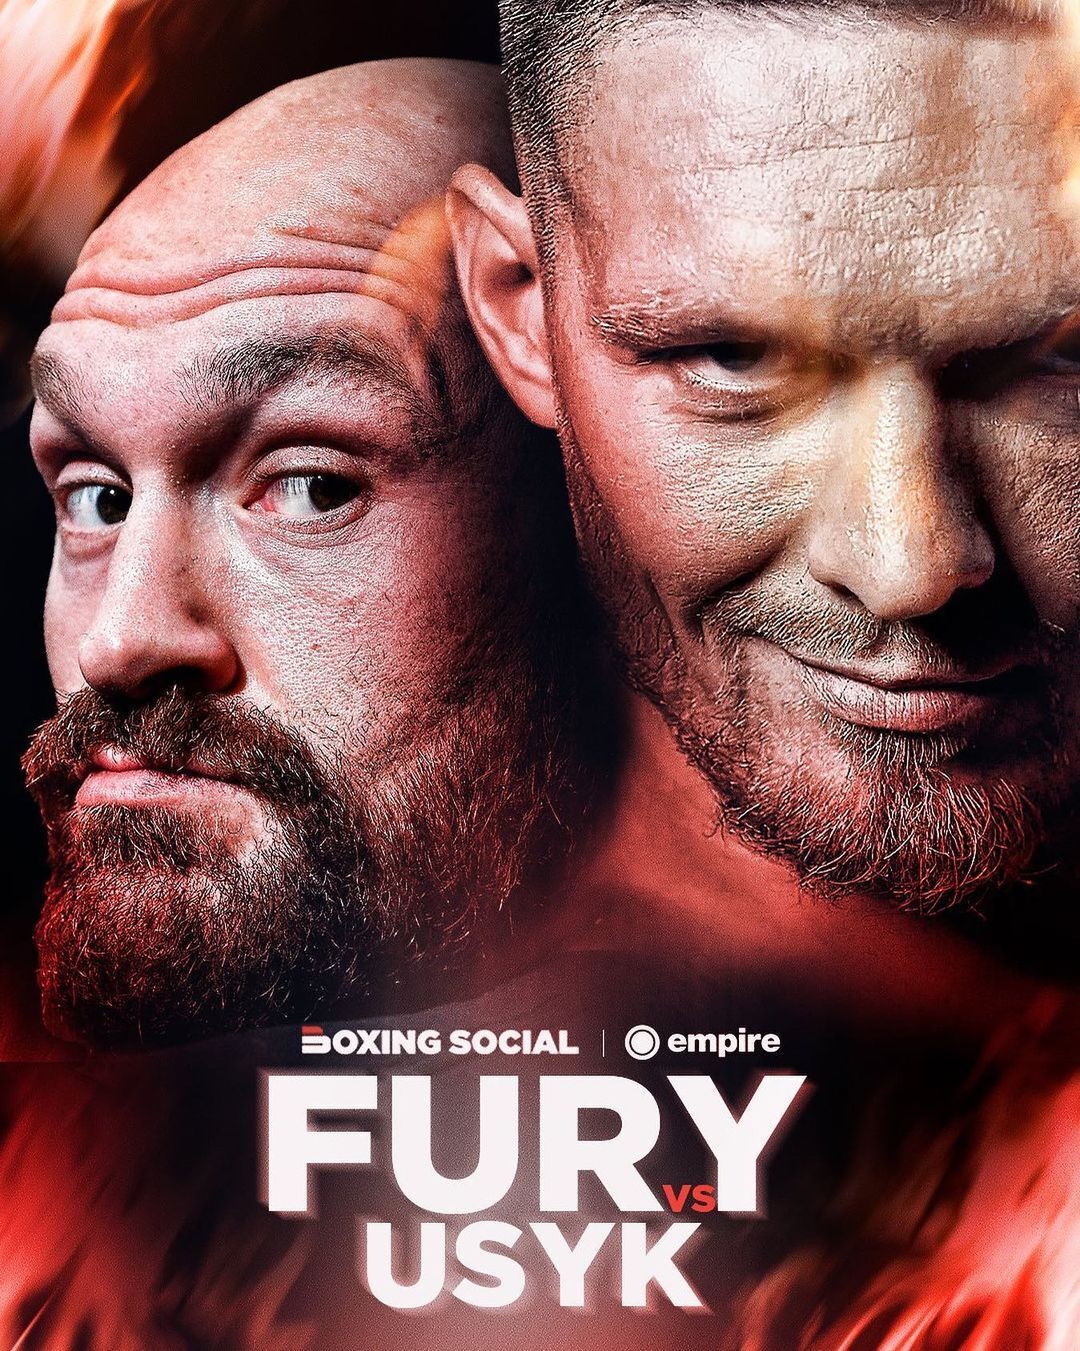 ''Starting today...'' Fury broke his silence and made a humiliating demand of Usyk. Video.